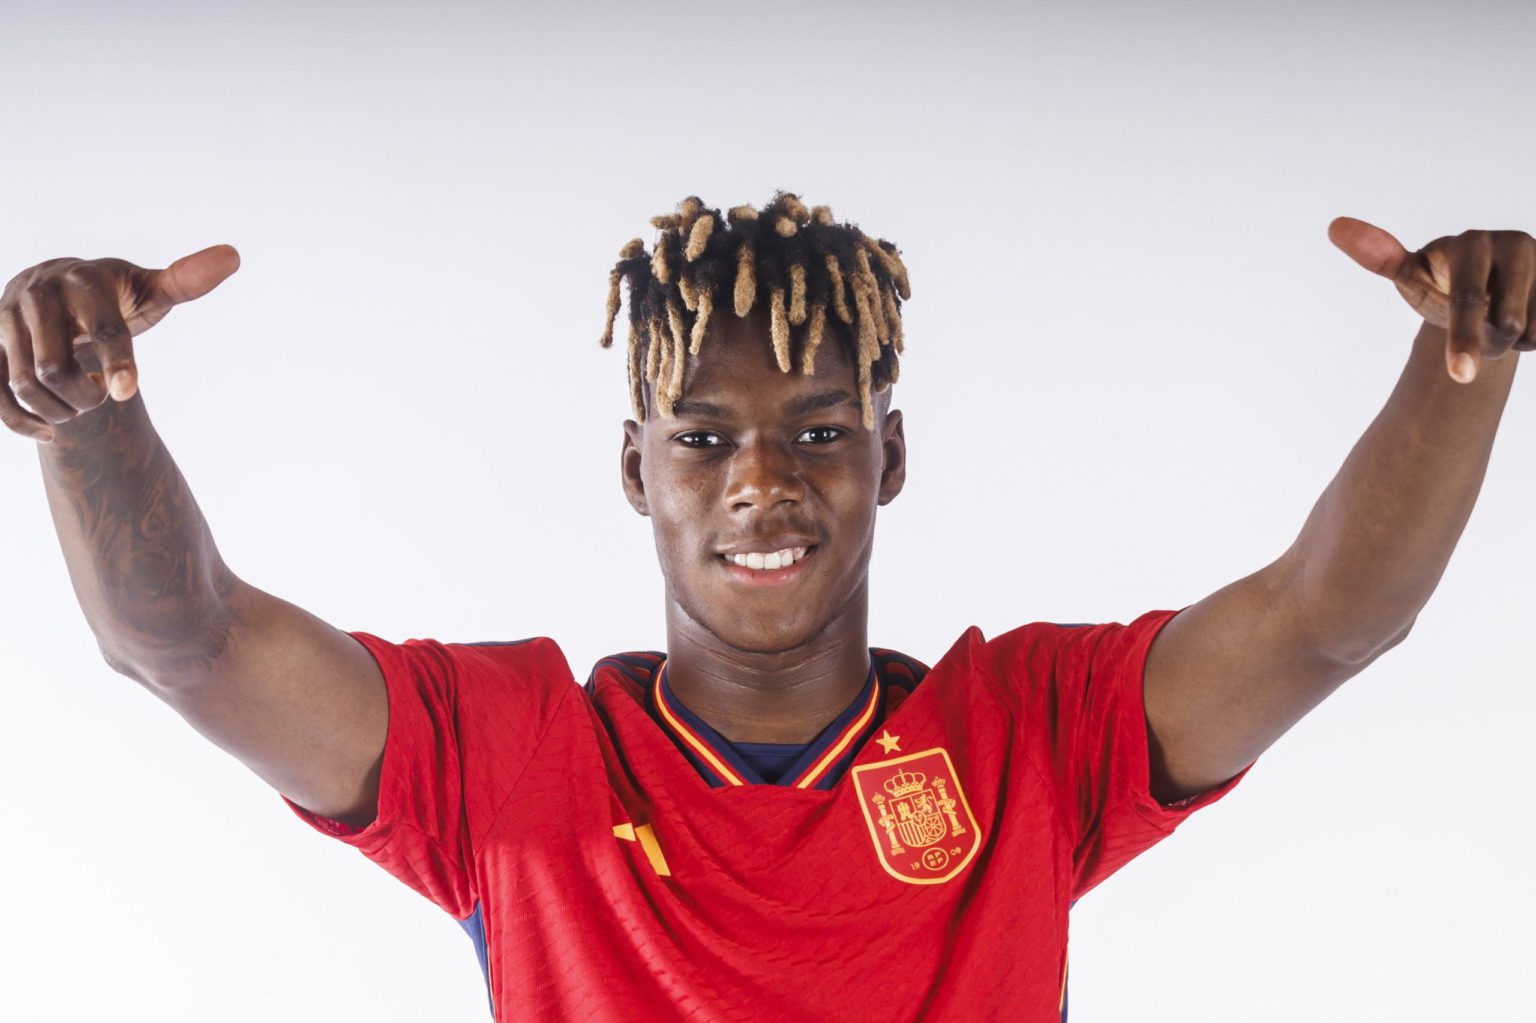  Nico Williams, a Spanish professional soccer player, is all smiles while posing in his red jersey with his arms in the air.